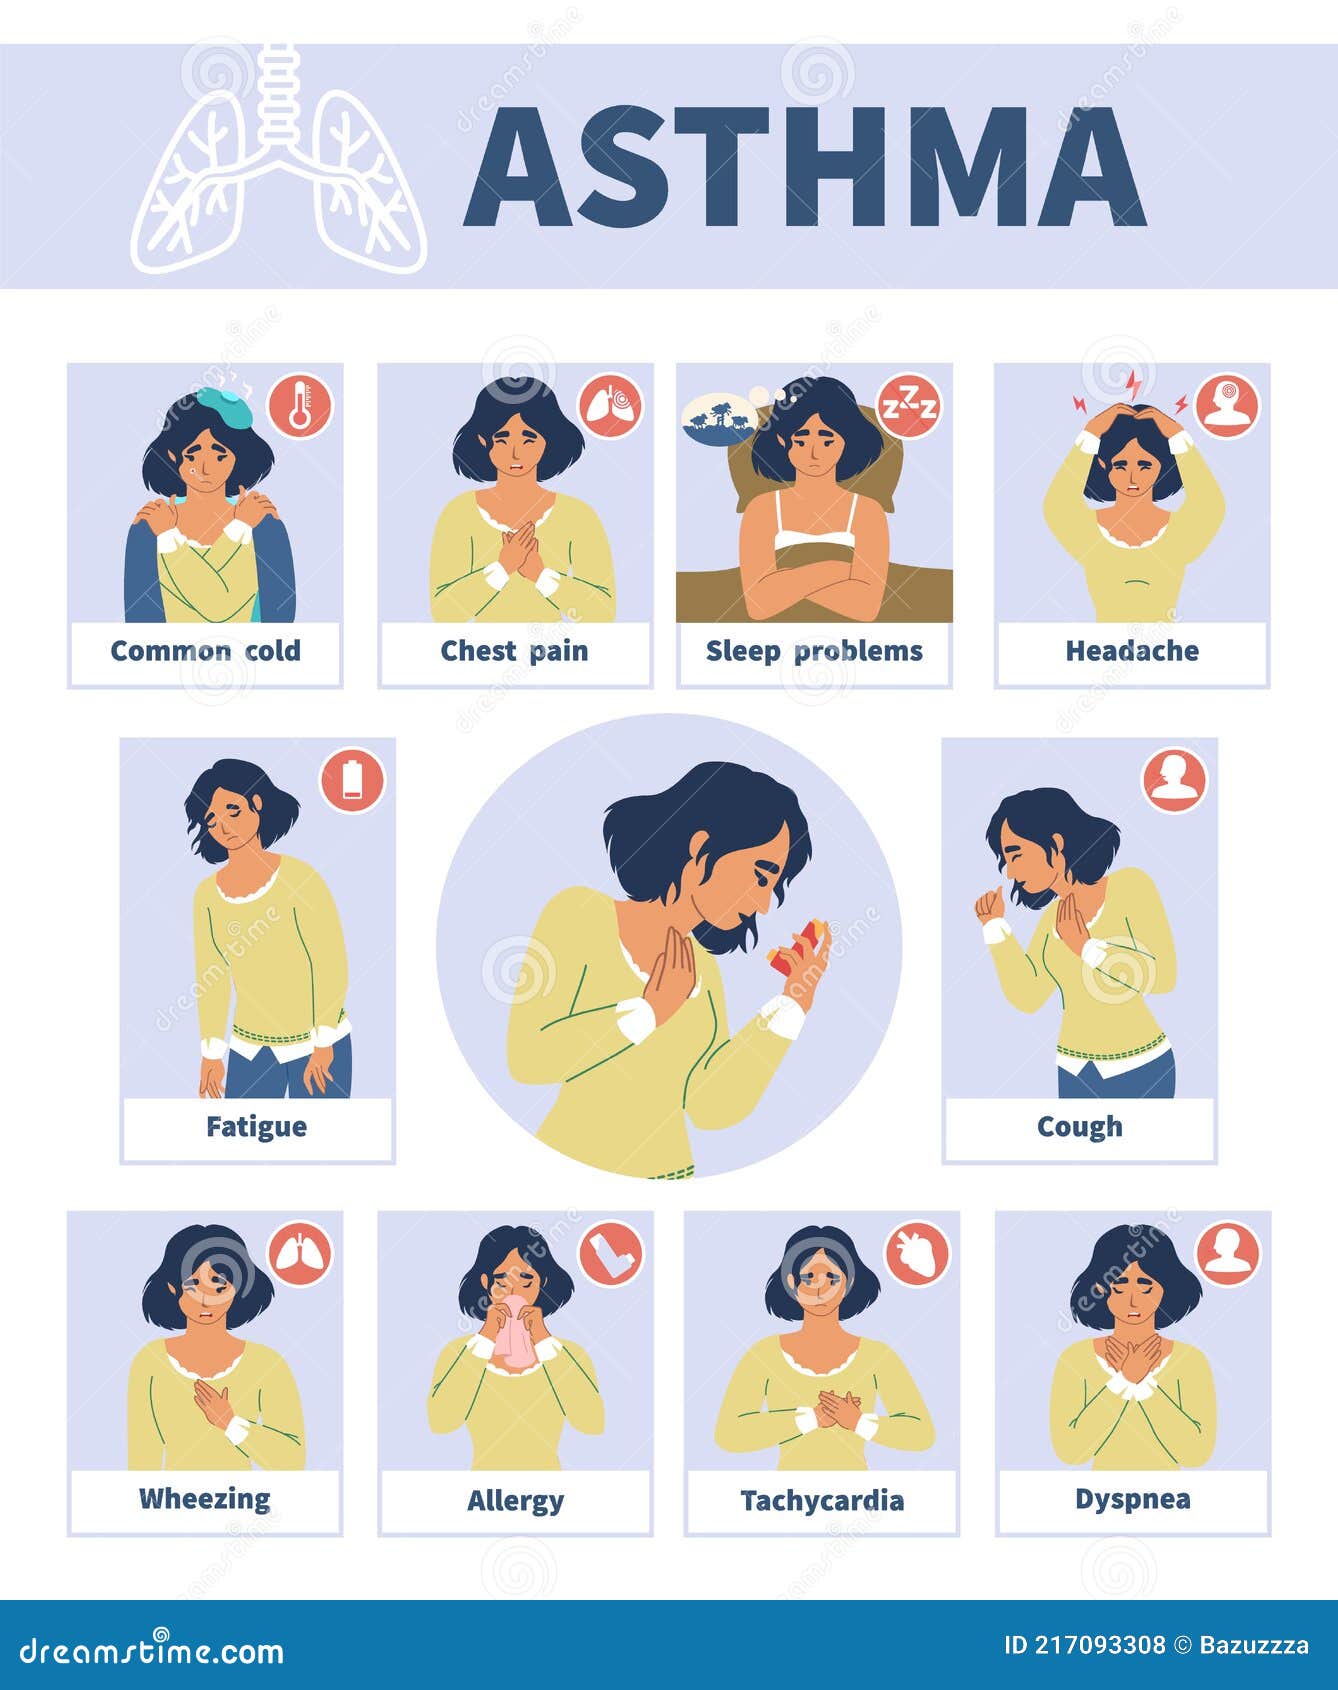 Asthma Symptoms With Coughing Cartoon Person Vector Image On ...